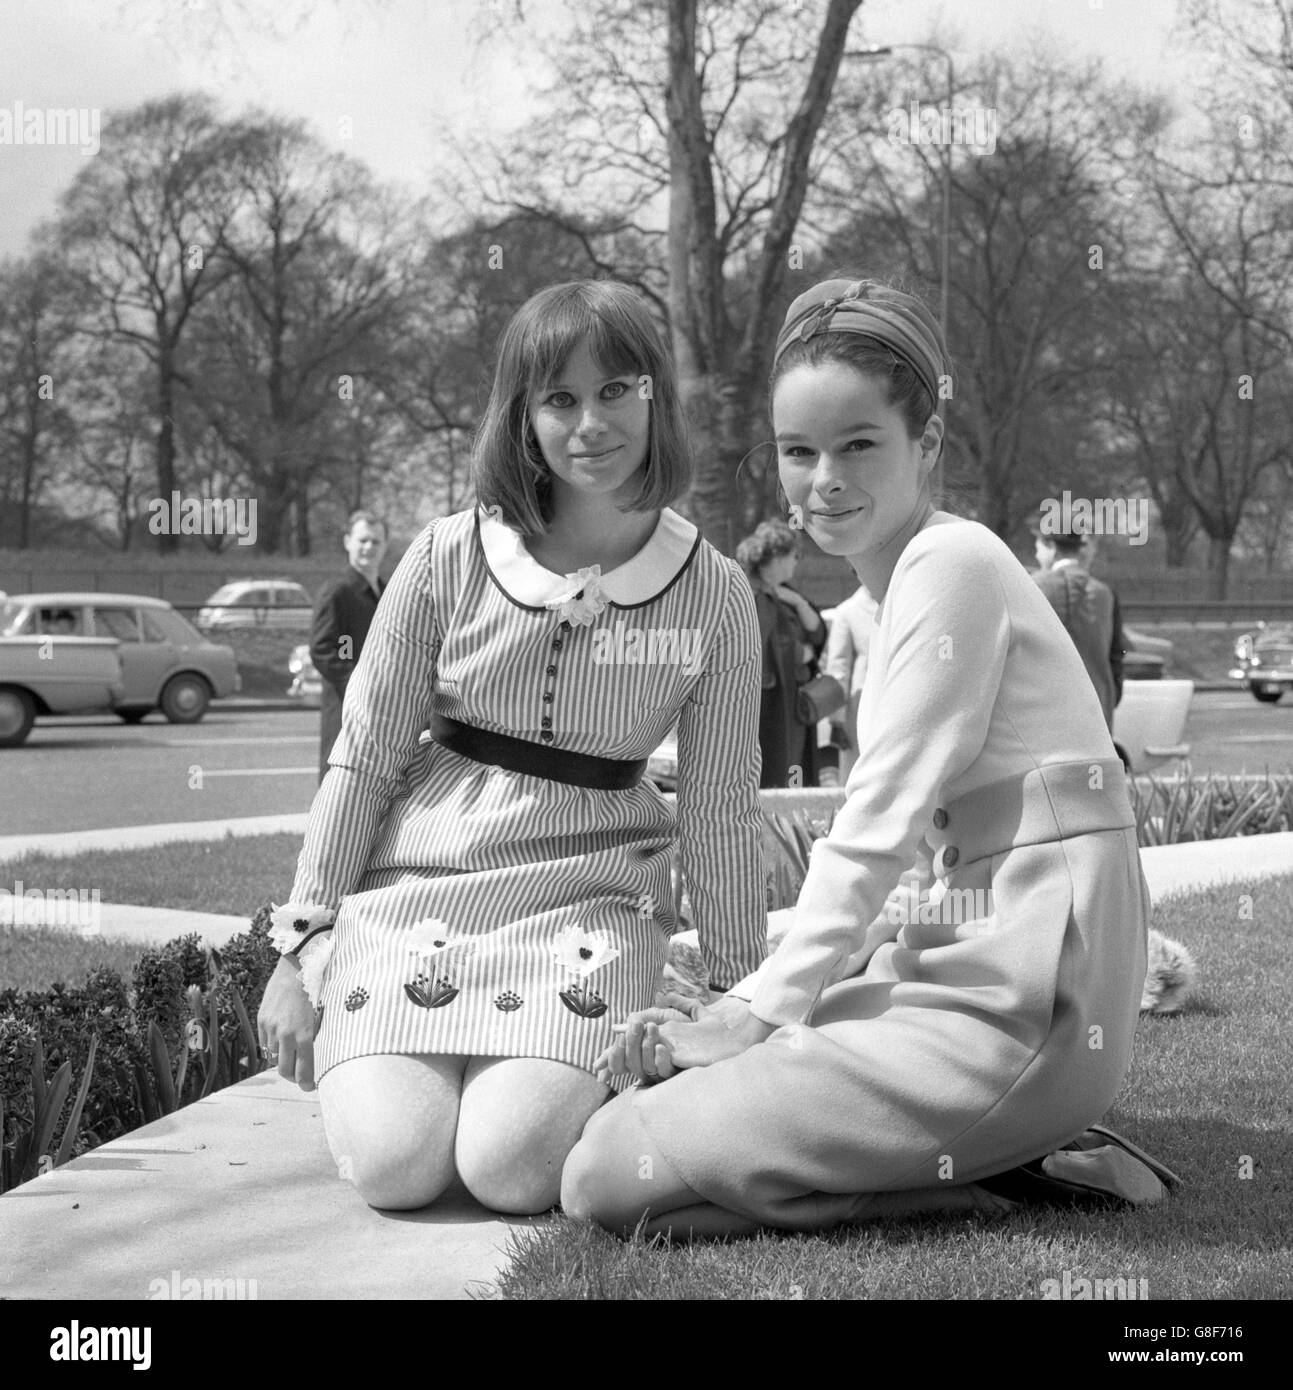 Actresses Rita Tushingham (left) and Geraldine Chaplin, the 21-year-old daughter of Charlie Chaplin, in Park Lane, London. They are two of the stars of the film Doctor Zhivago and will attend its Royal charity premiere at the Empire Theatre, Leicester Square. Stock Photo